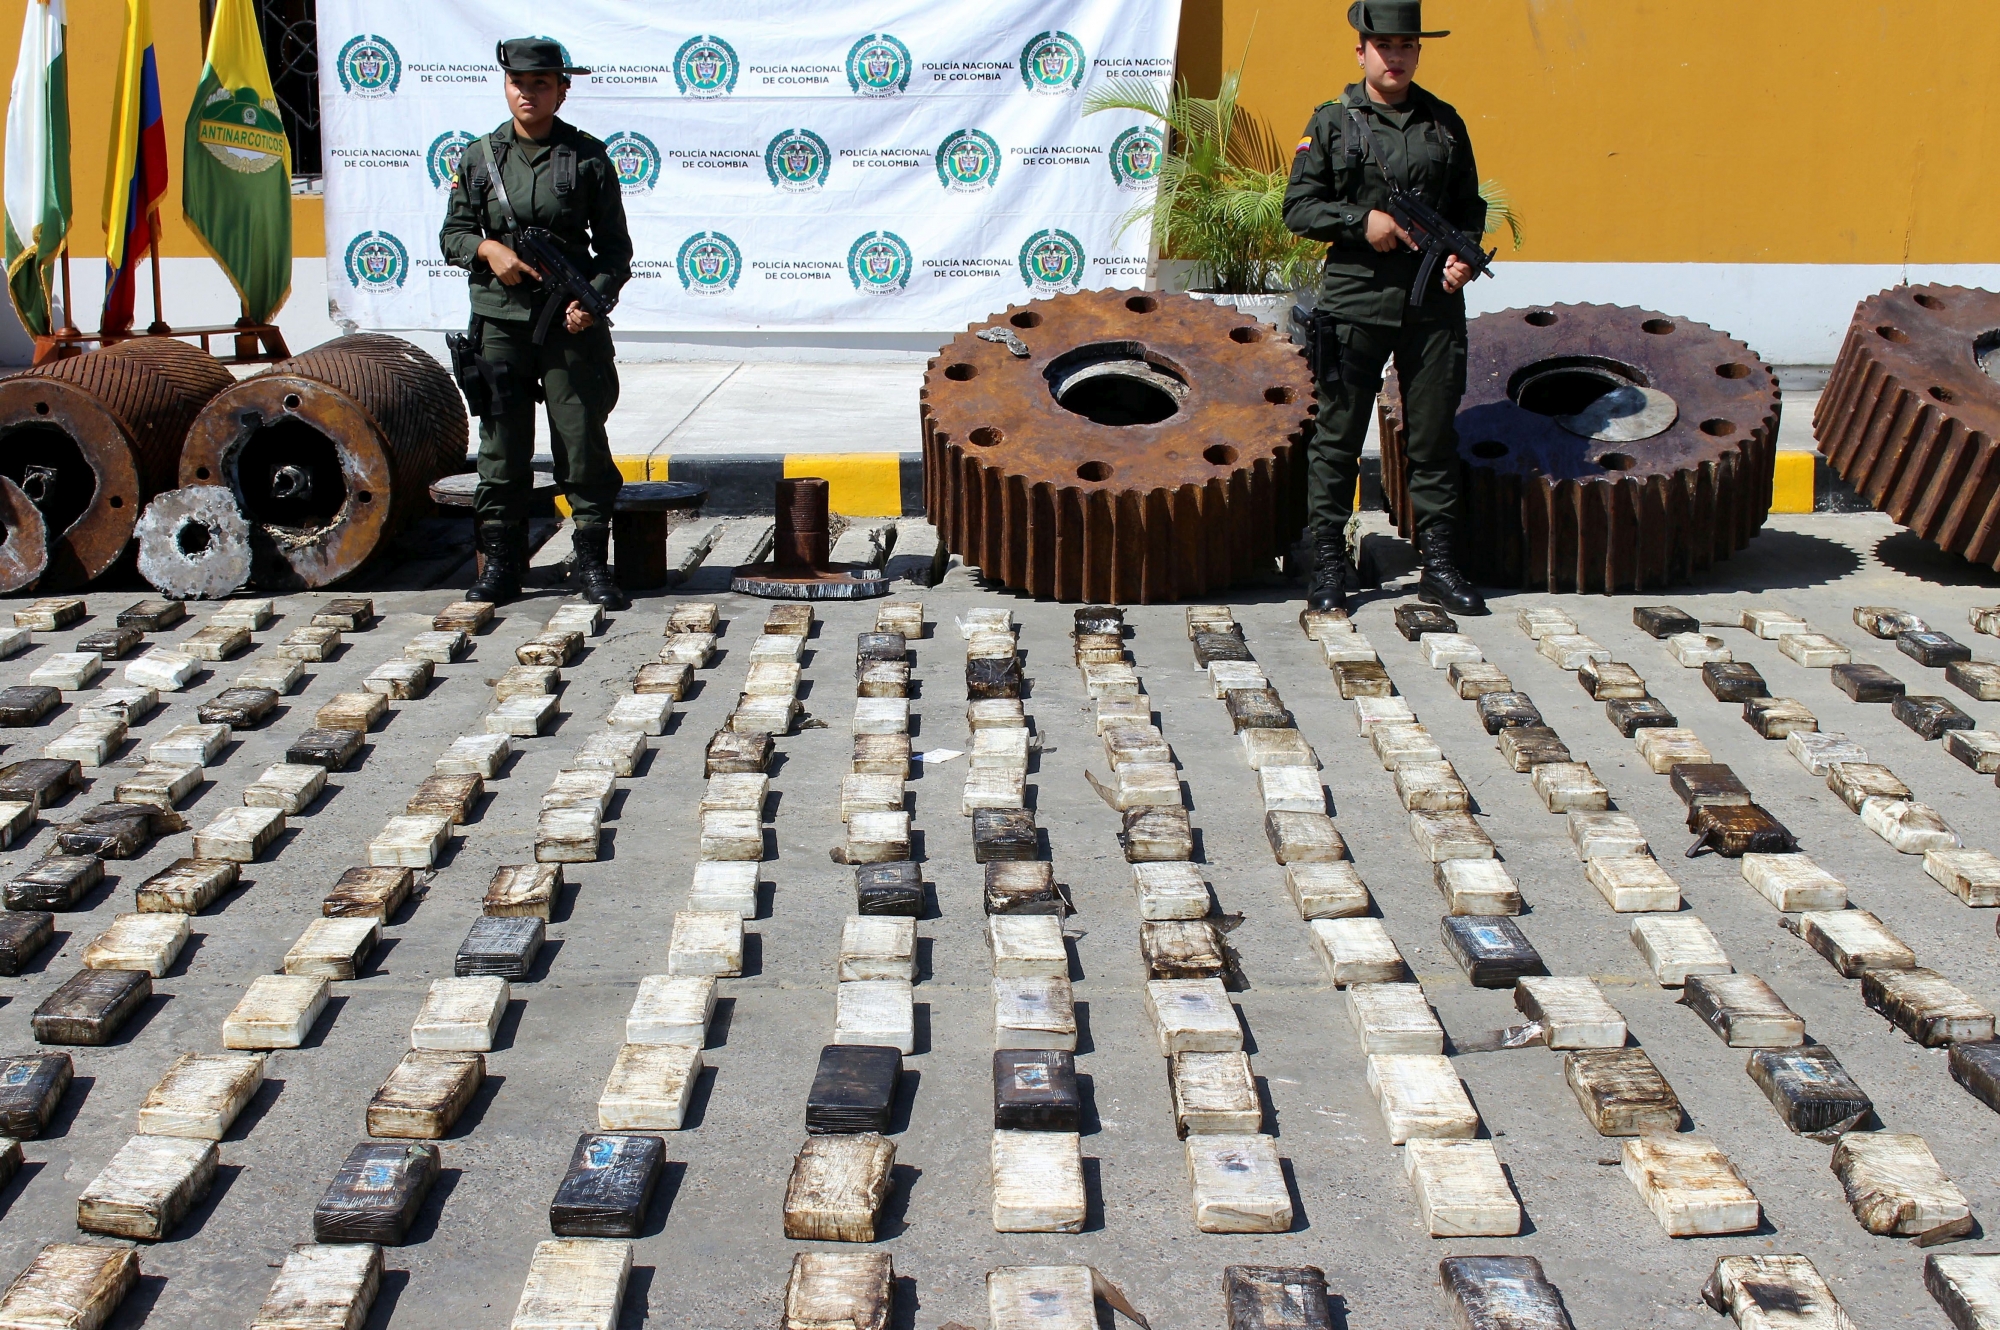 epa07191627 Police guard cocaine seized, in Barranquilla, Colombia, 26 November 2018. Colombian authorities seized more than half a ton of cocaine that was destined for Rotterdam, Netherlands and that was camouflaged in pieces of steel in a shipment in the port of Barranquilla, reports police sources. EPA/Hugo Penso